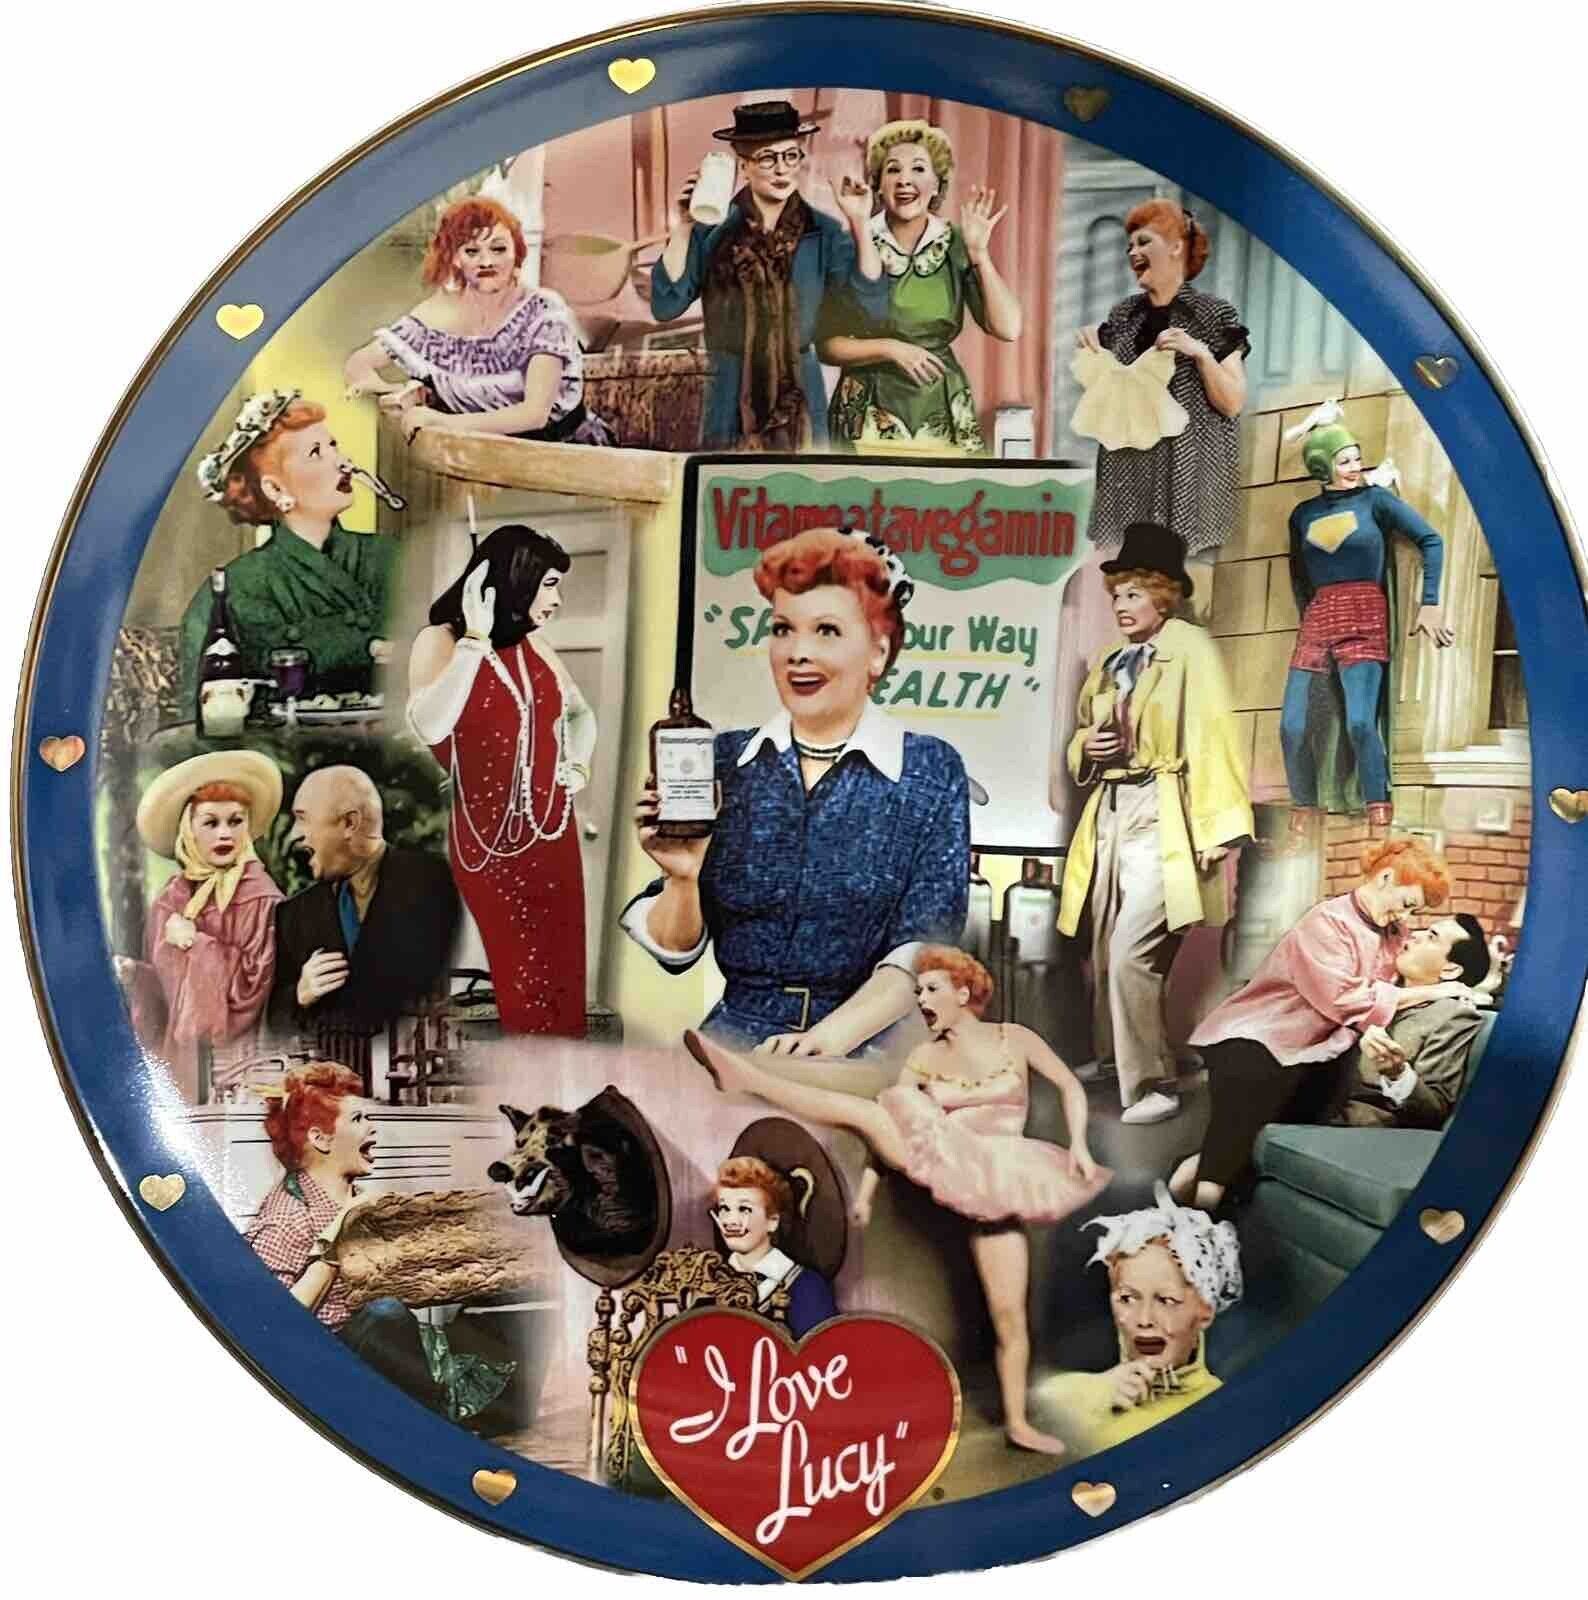 I Love Lucy Danbury Mint Test Market Plate COA, Box & Stand Included  Year 2003